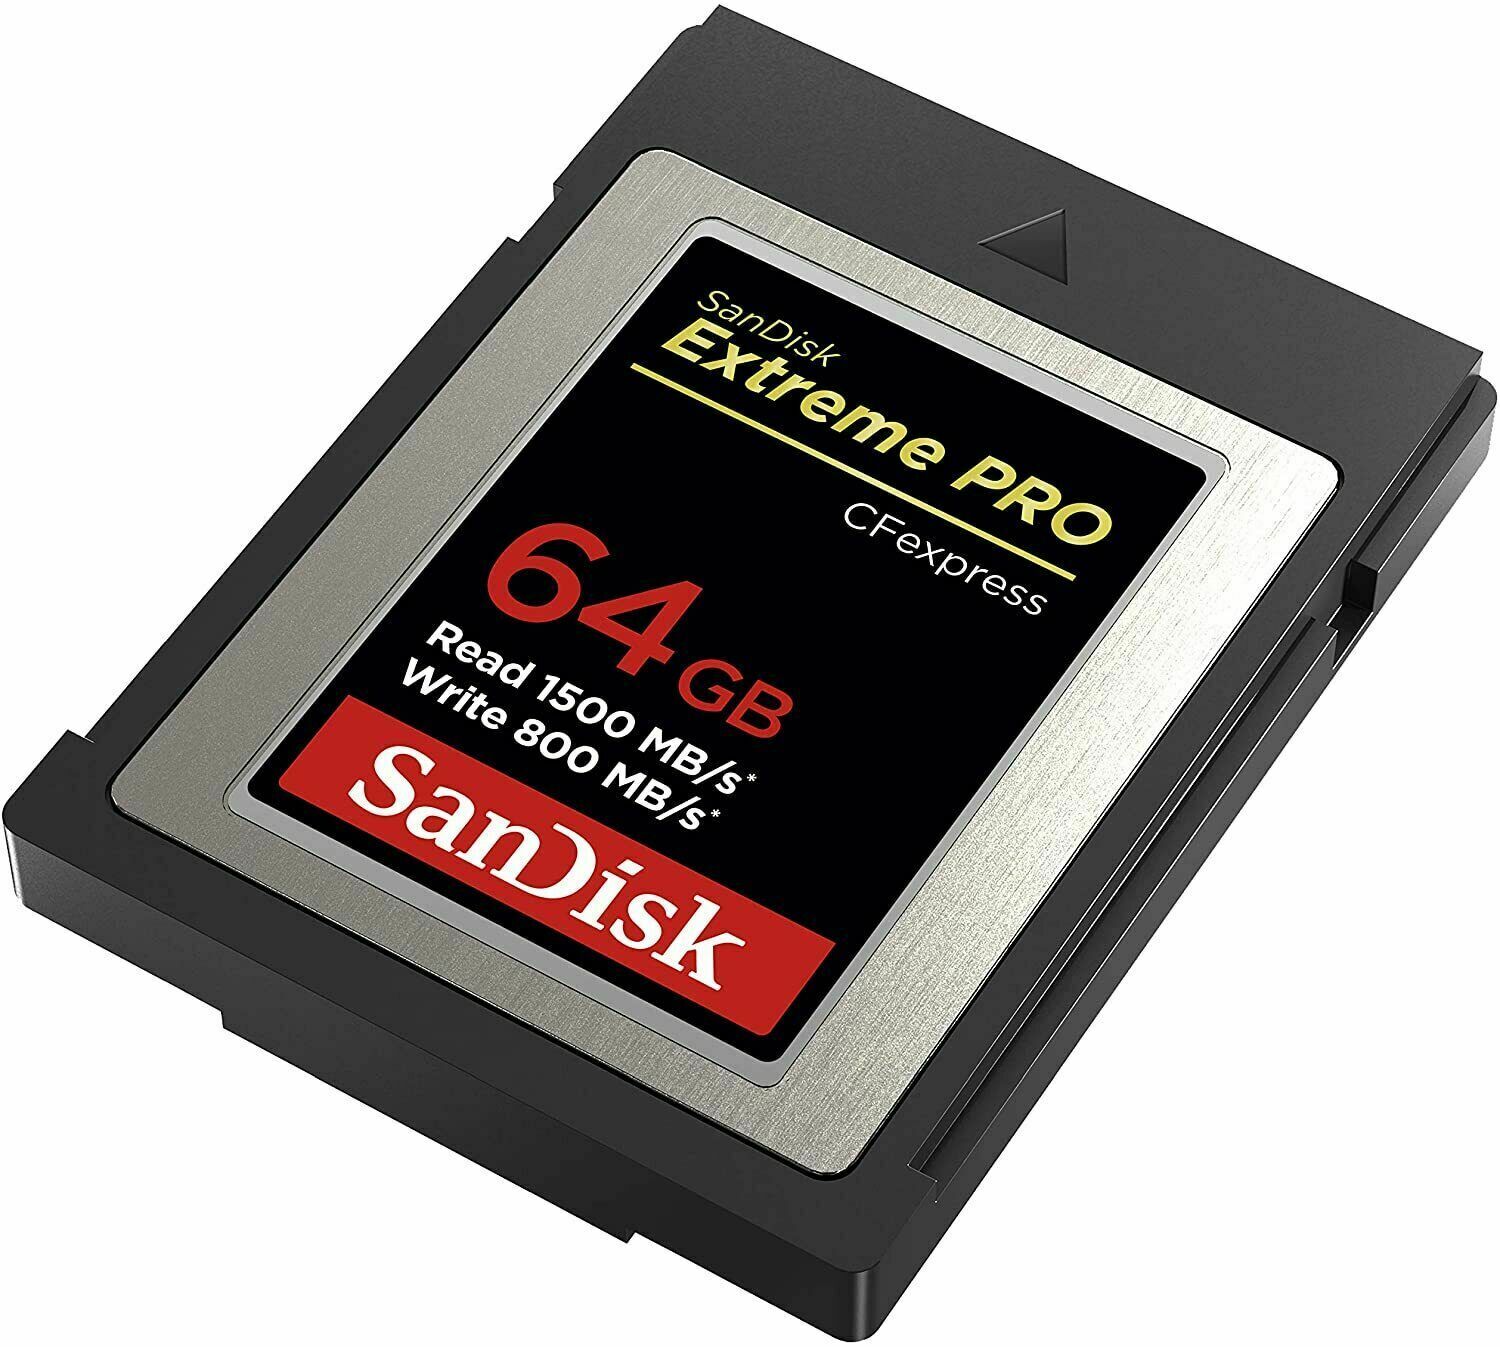 SanDisk EXTREME PRO CFEXPRESS 64GB TYPE B 1500/800 MB/s